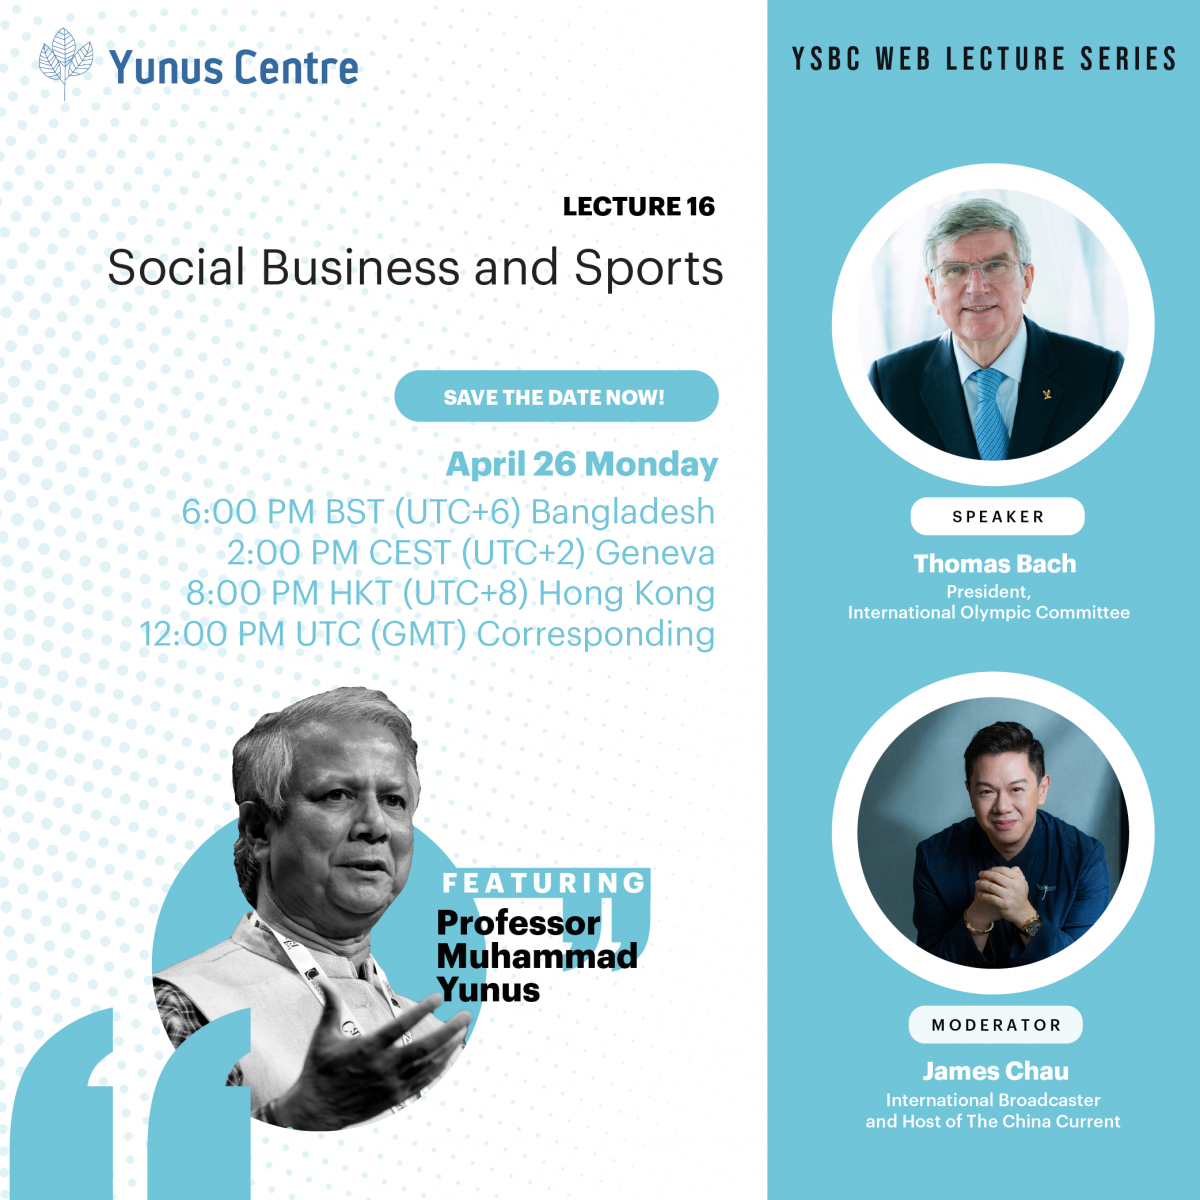 YSBC Web Lecture Series - Lecture#16: Social Business and Sports